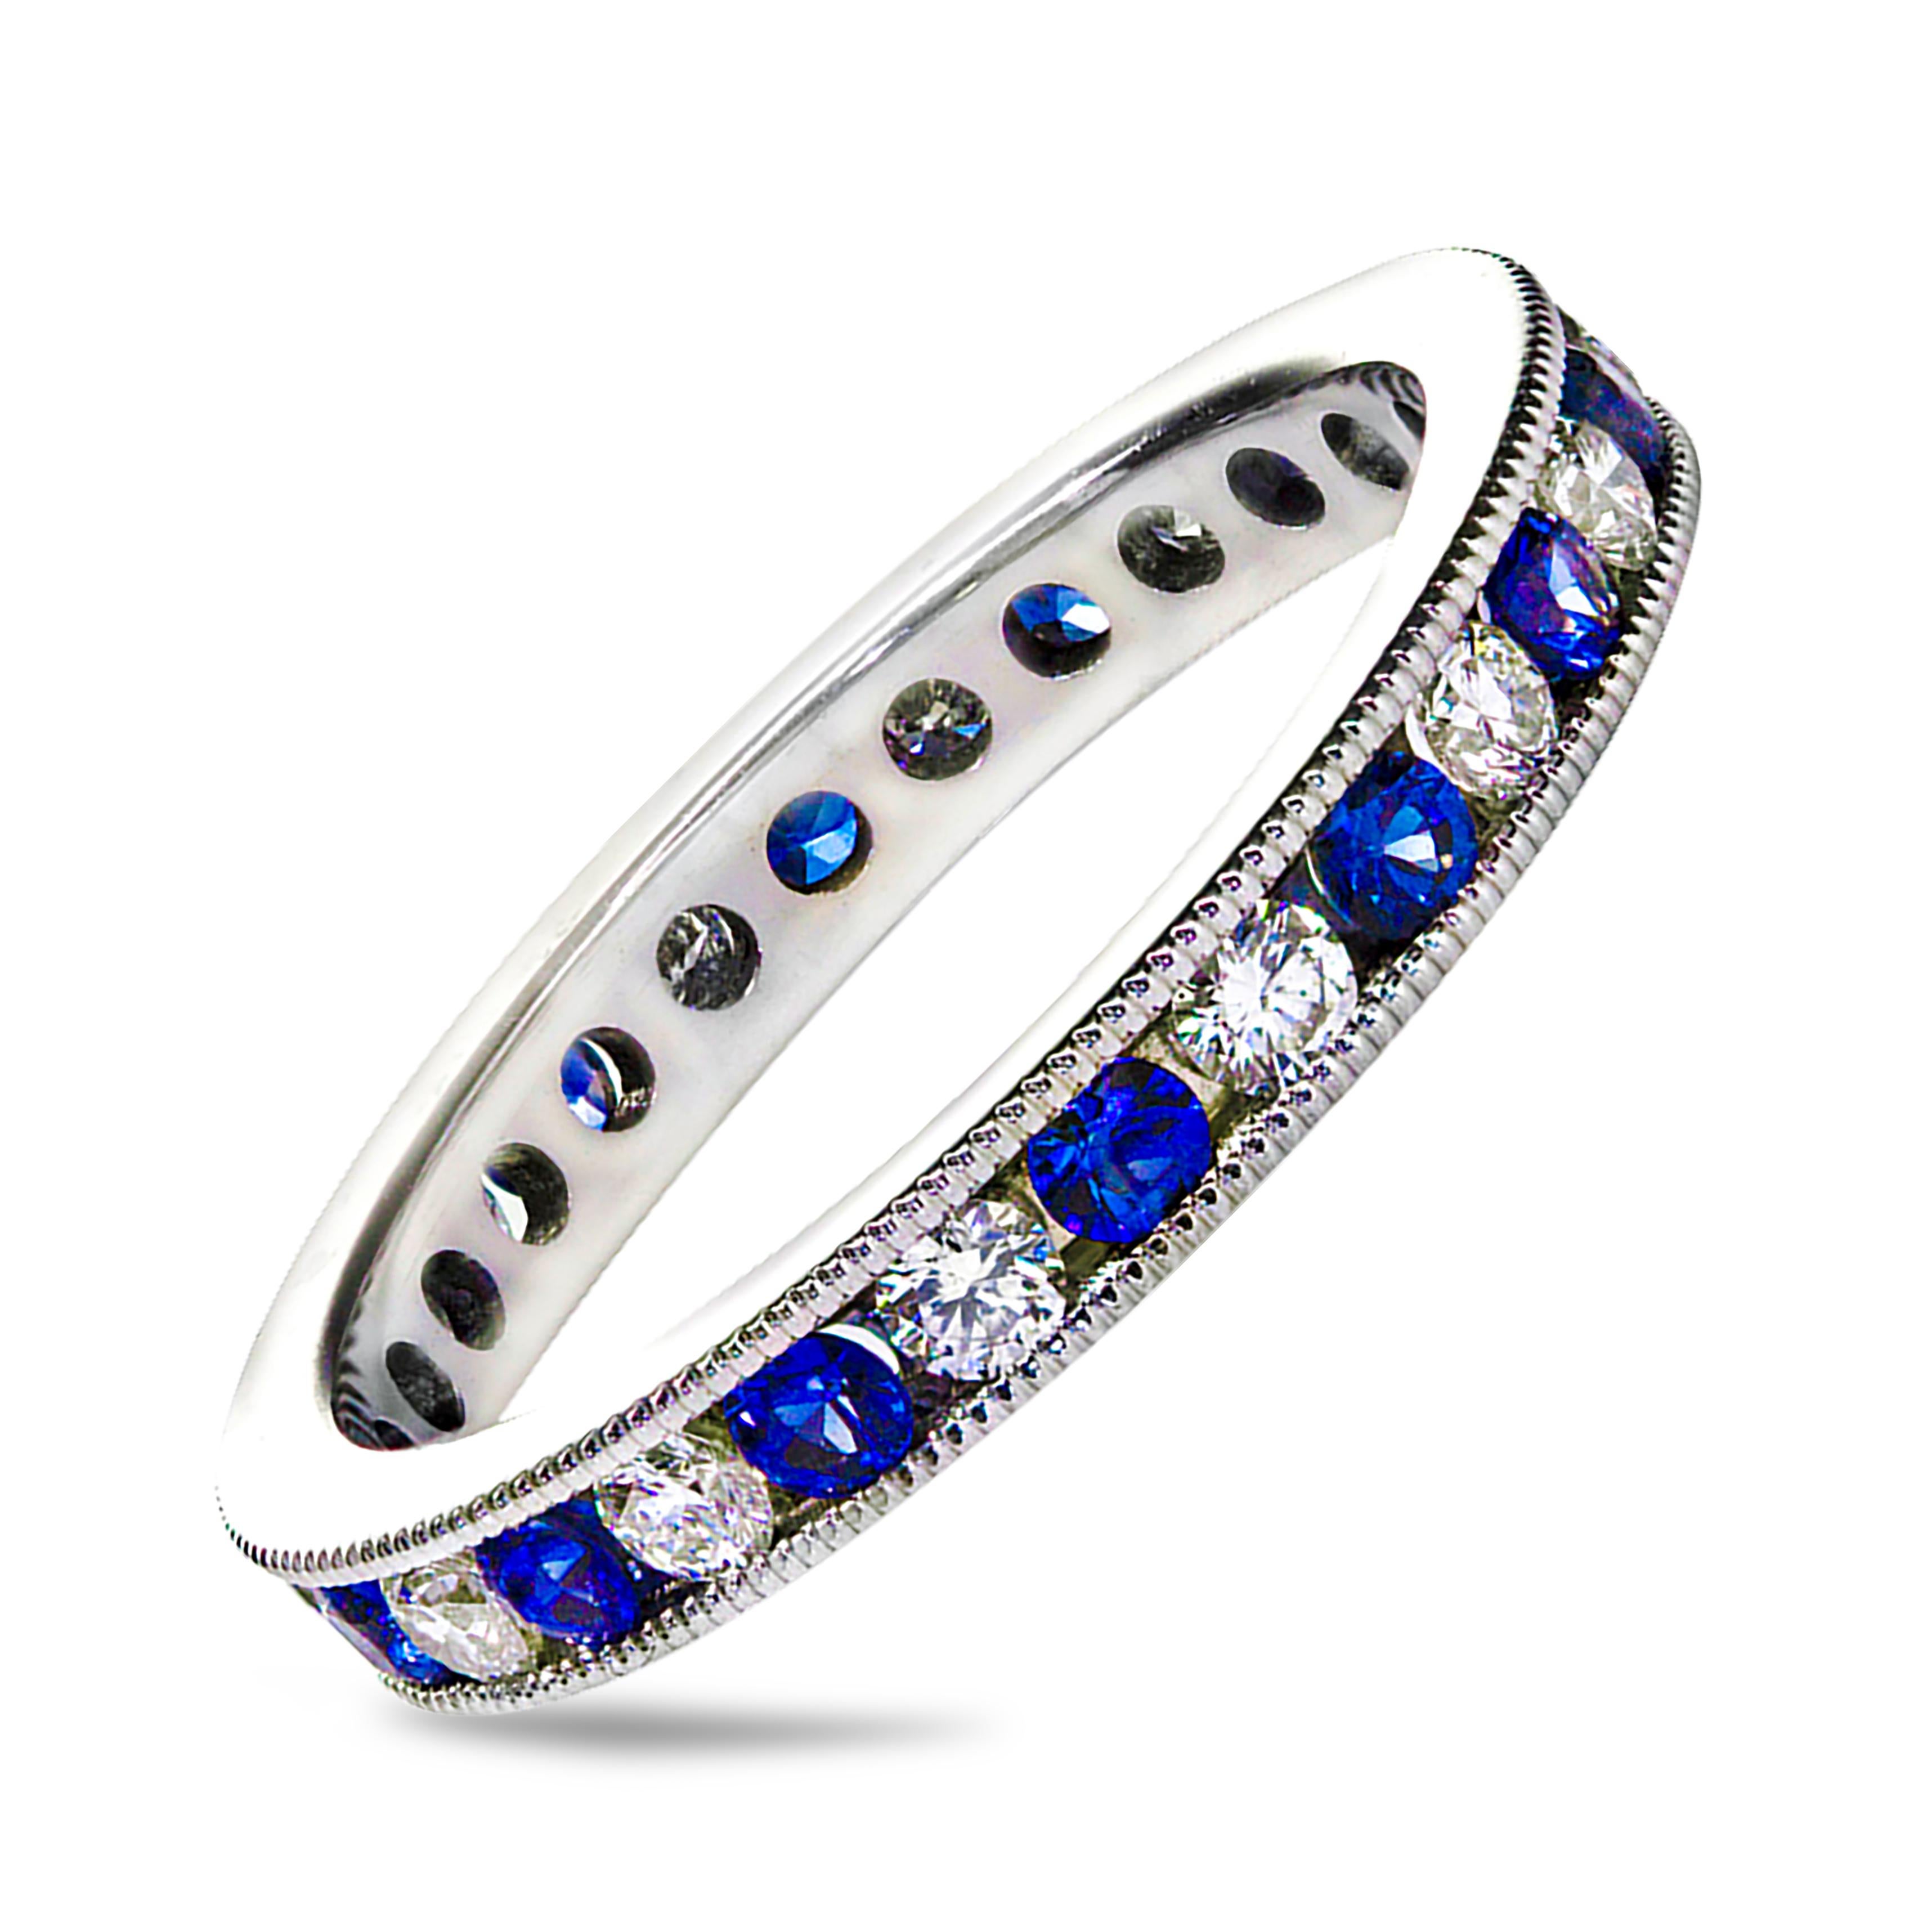 A well-crafted wedding band, showcasing round cut blue sapphires weighing 0.62 carats, alternating with round white diamonds weighing 0.50 carats total. Channel set and finished with intricate milgrain edges. Made with 18K white gold. Size 6.5 US.